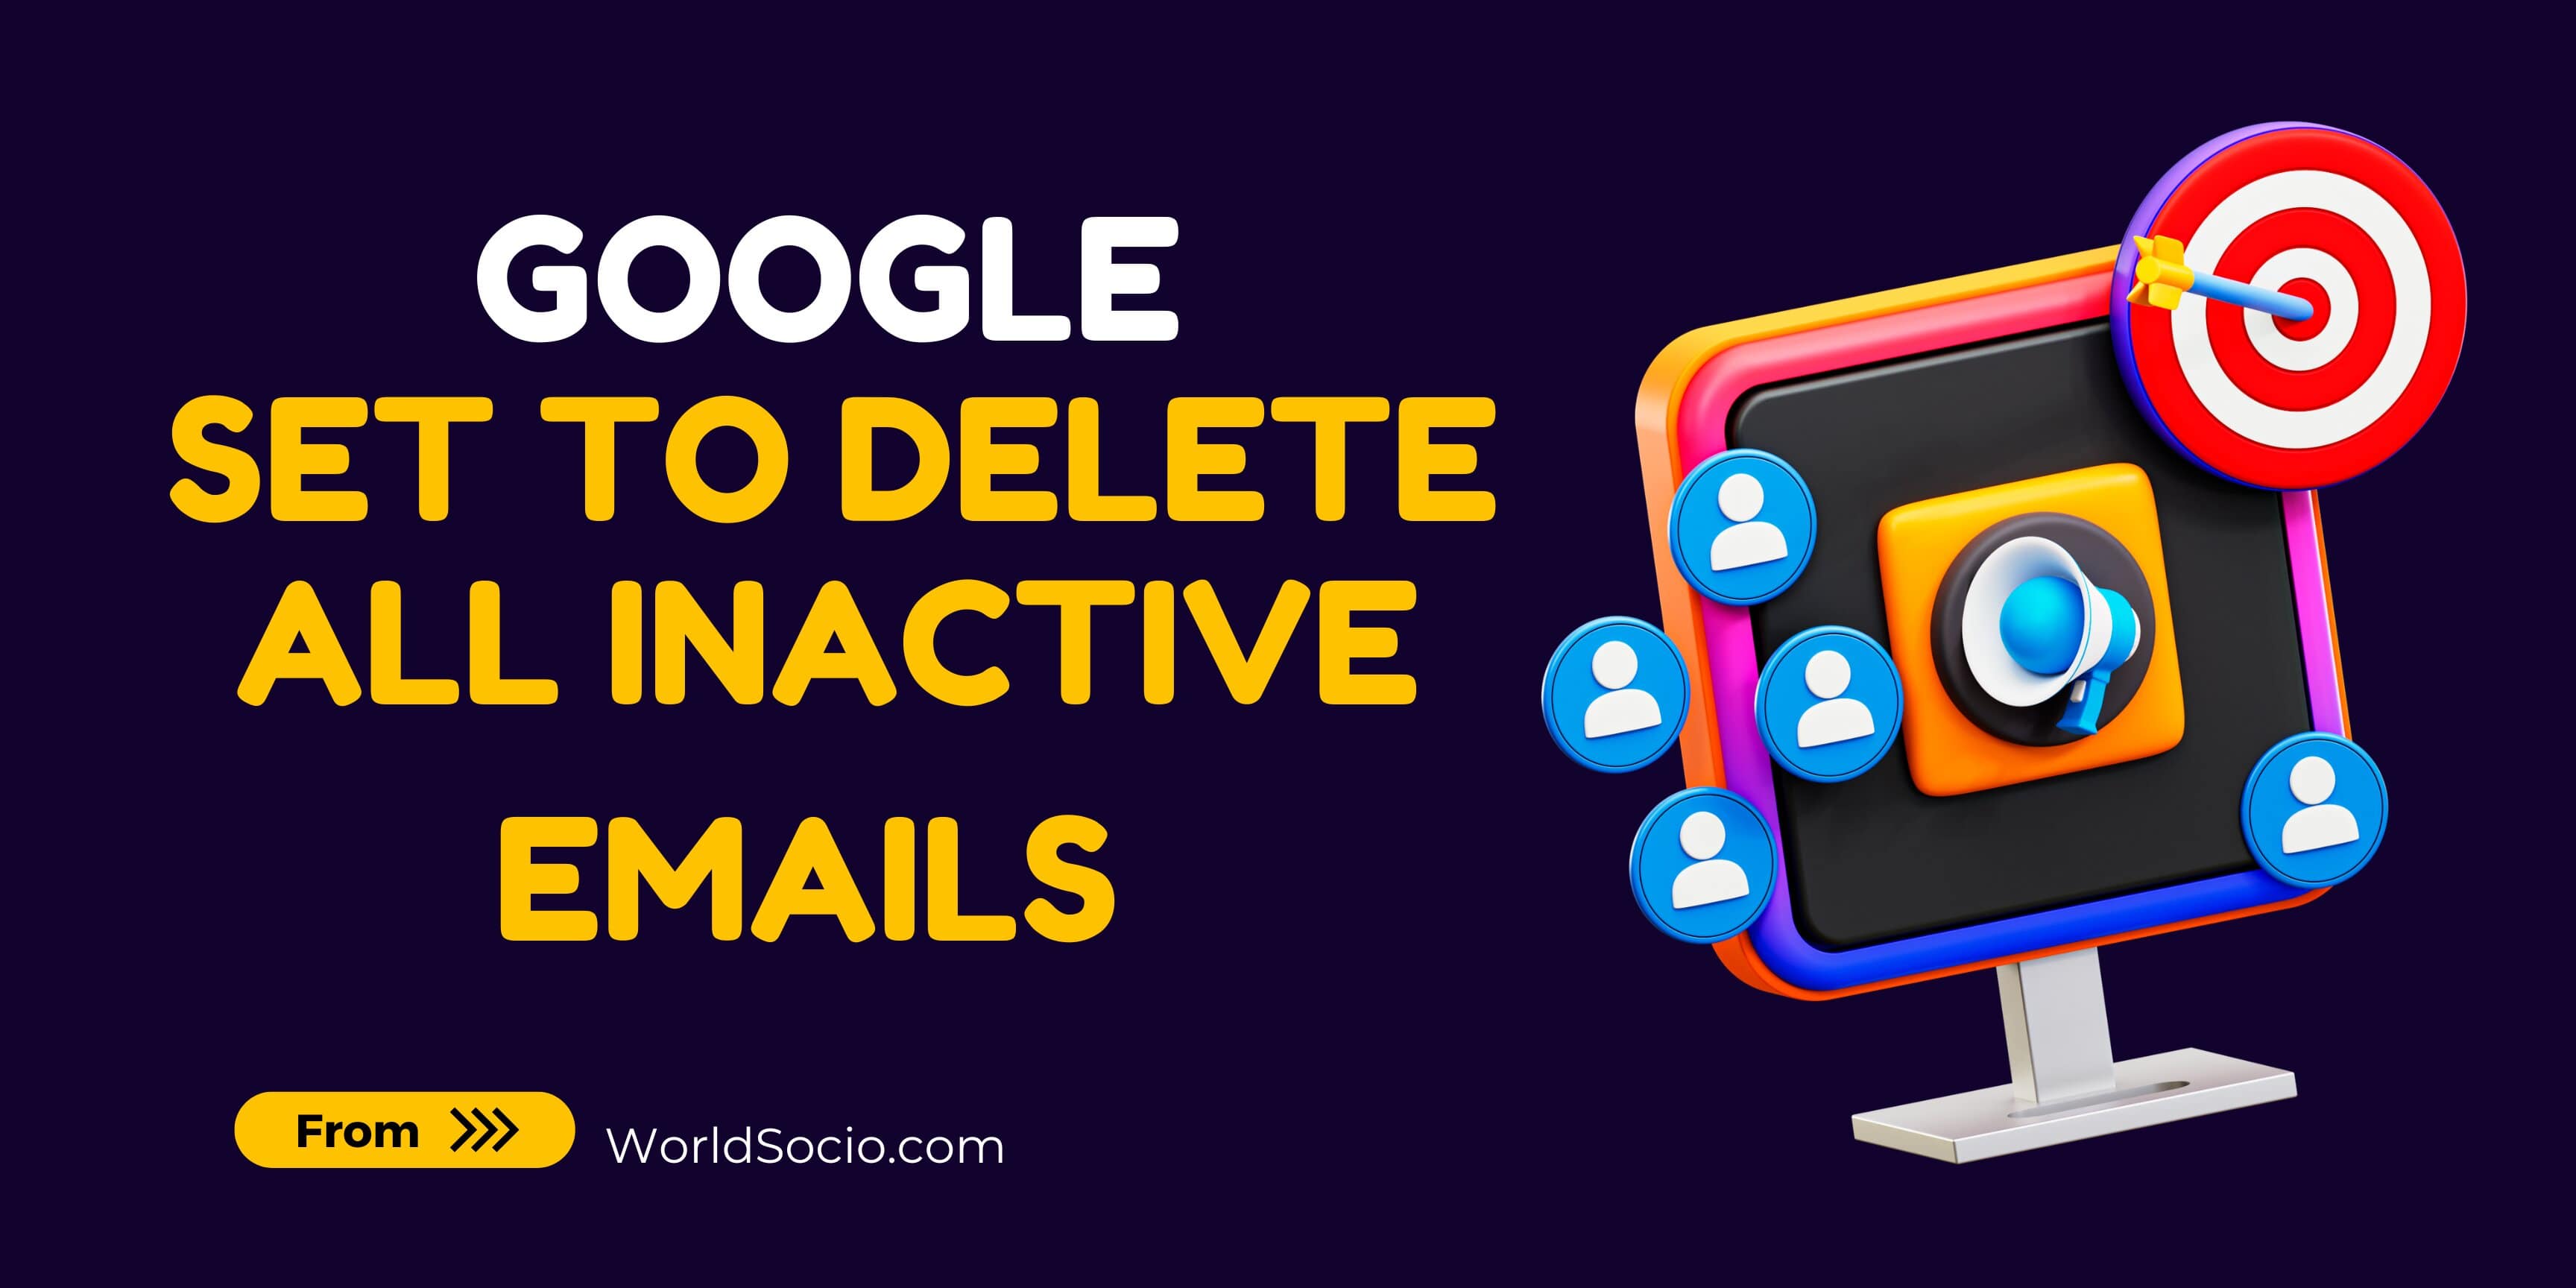 Google Set To Delete All Inactive Emails From December 2023, worldsocio.jpg